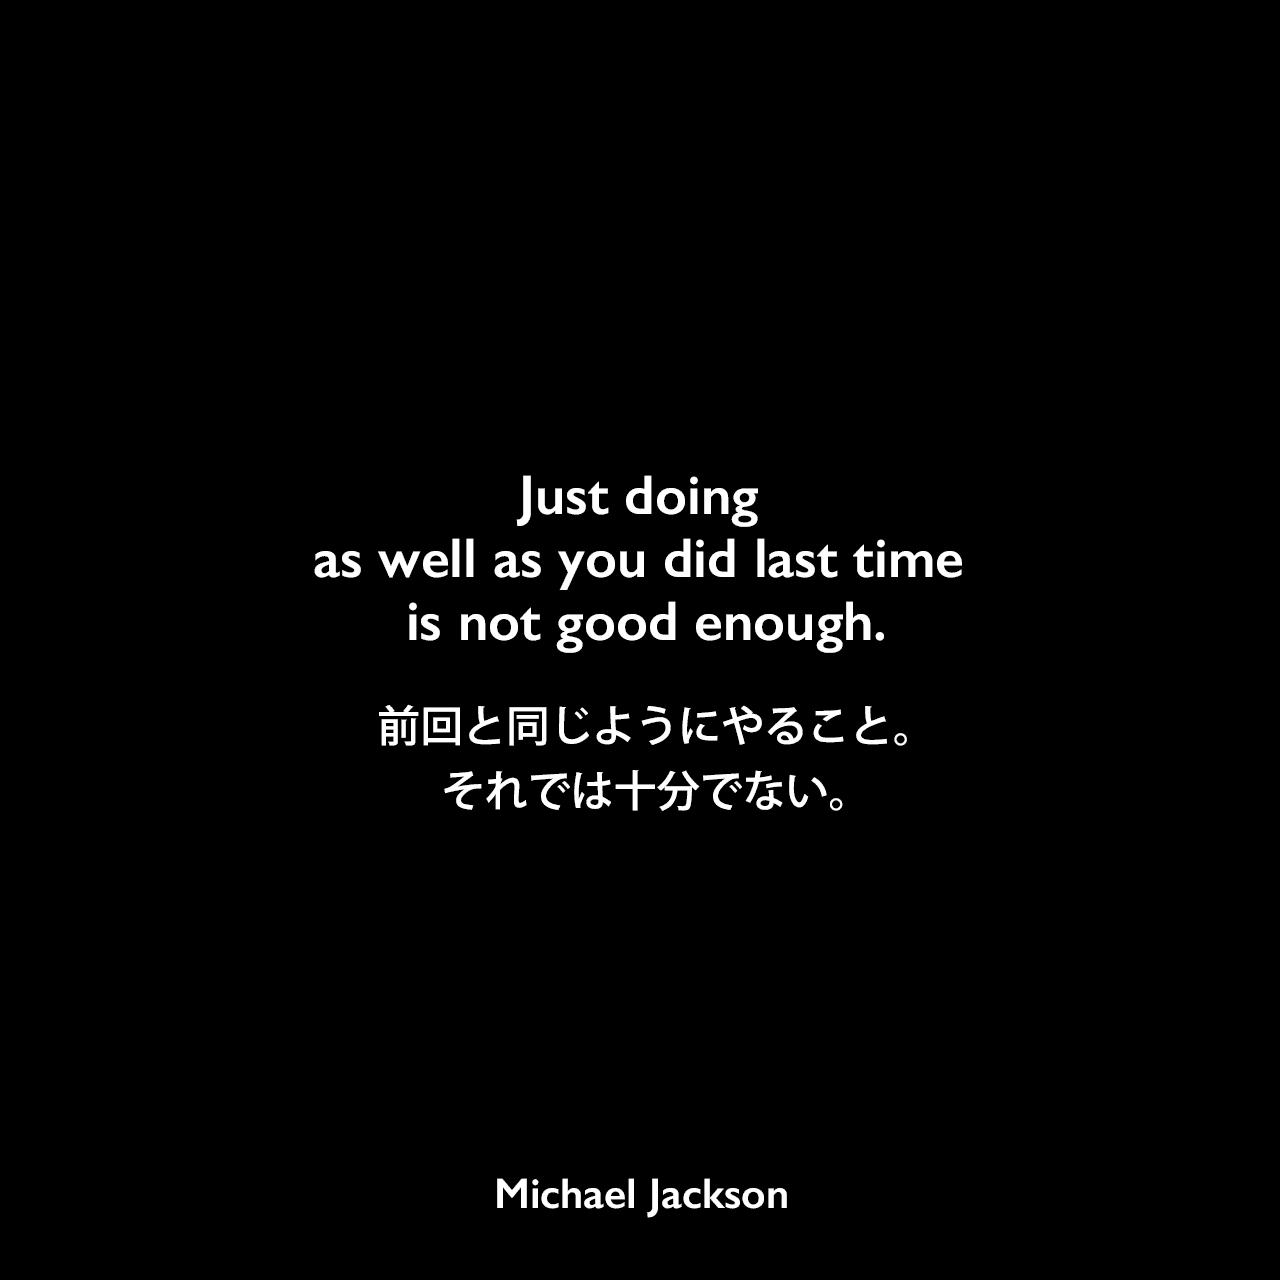 Just doing as well as you did last time is not good enough.前回と同じようにやること。それでは十分でない。Michael Jackson